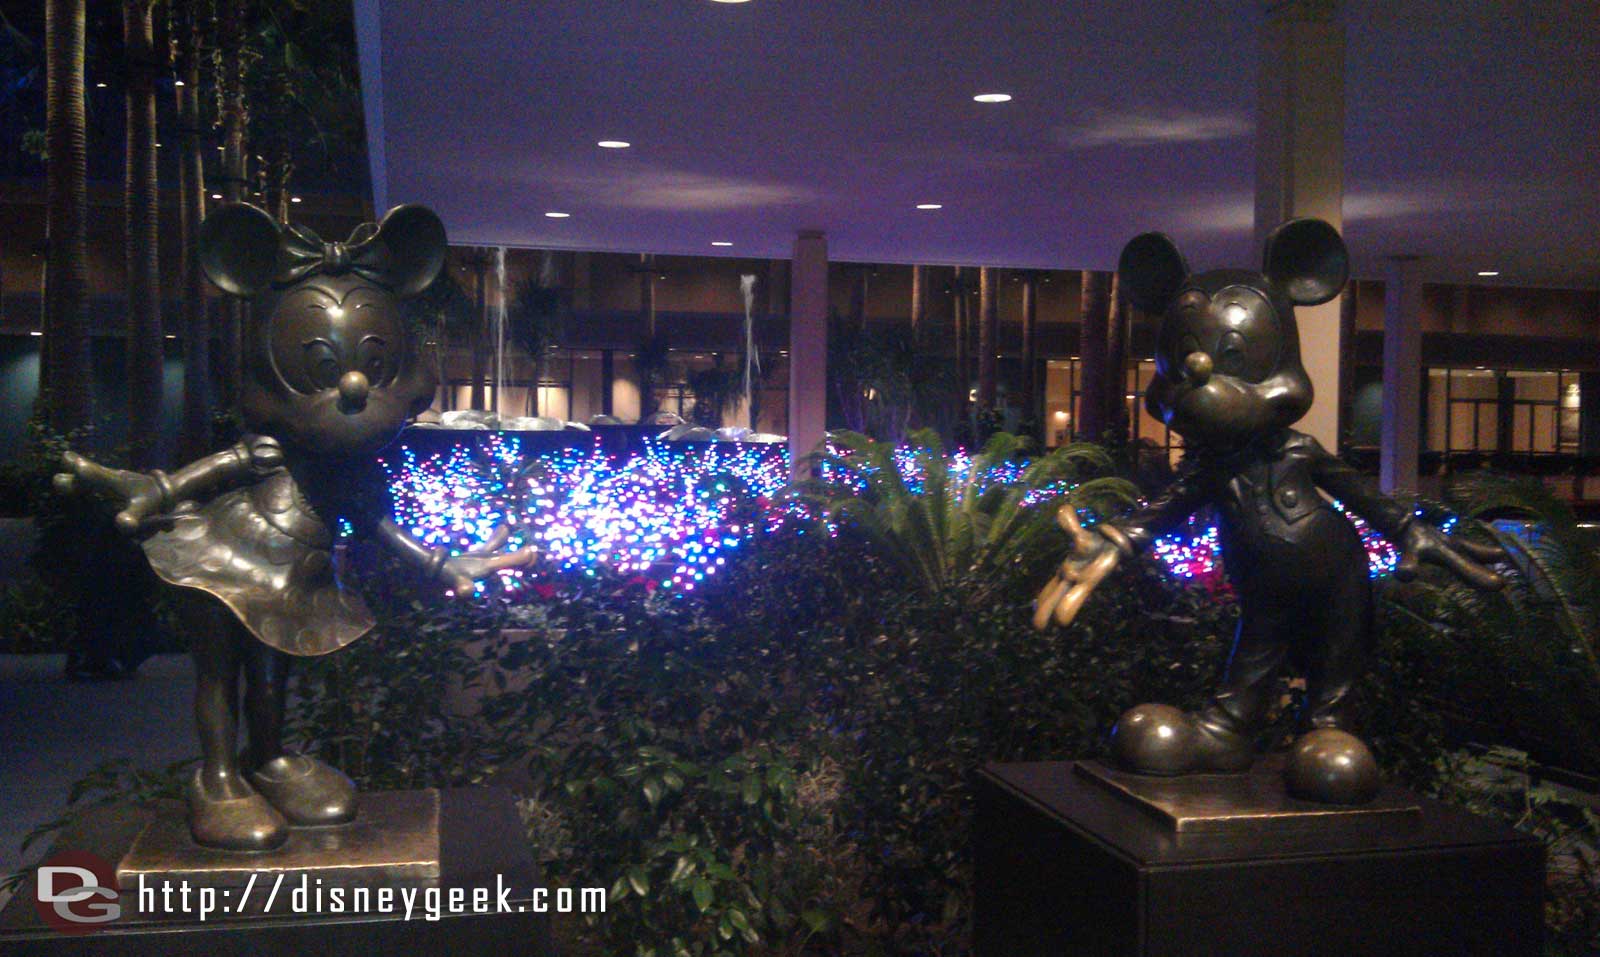 The flowerbeds around the fountains in front of the Fantasy Tower are full of lights.